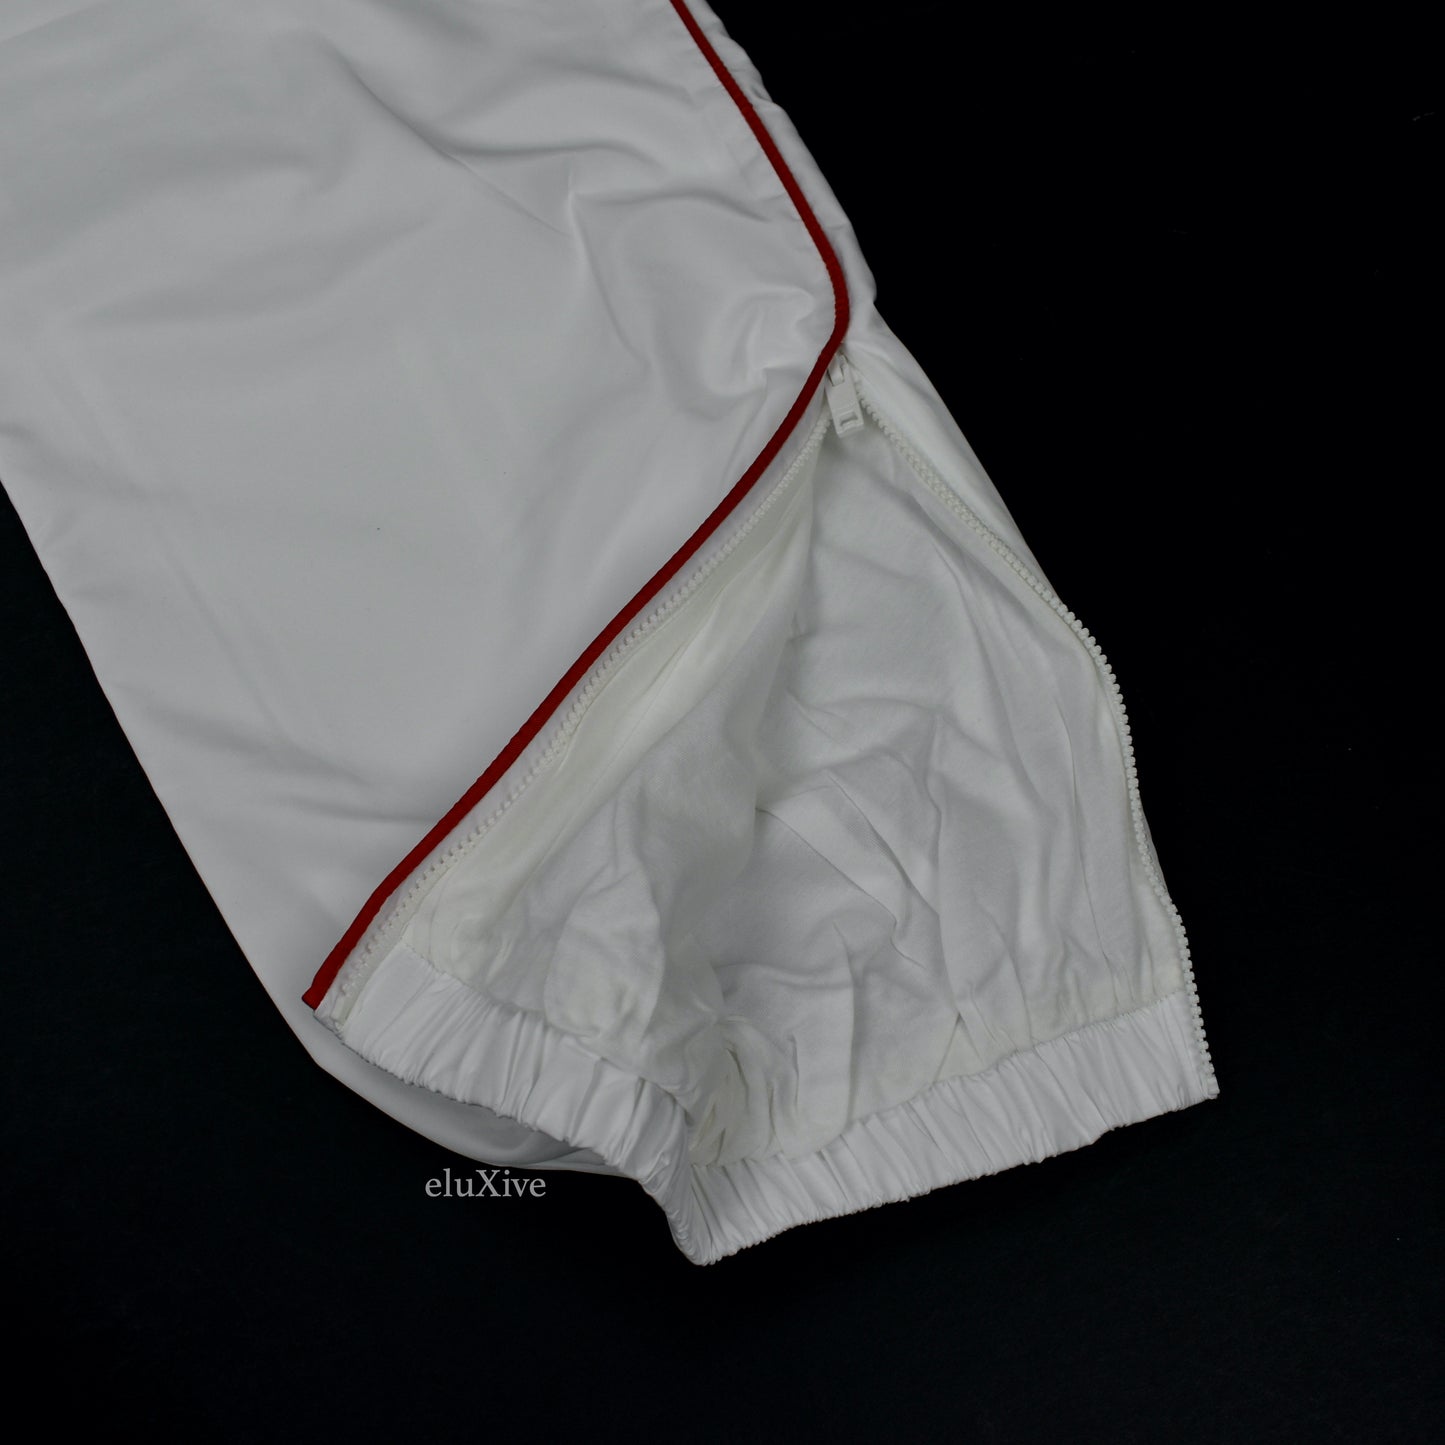 Burberry - White Red Piping Track Pants